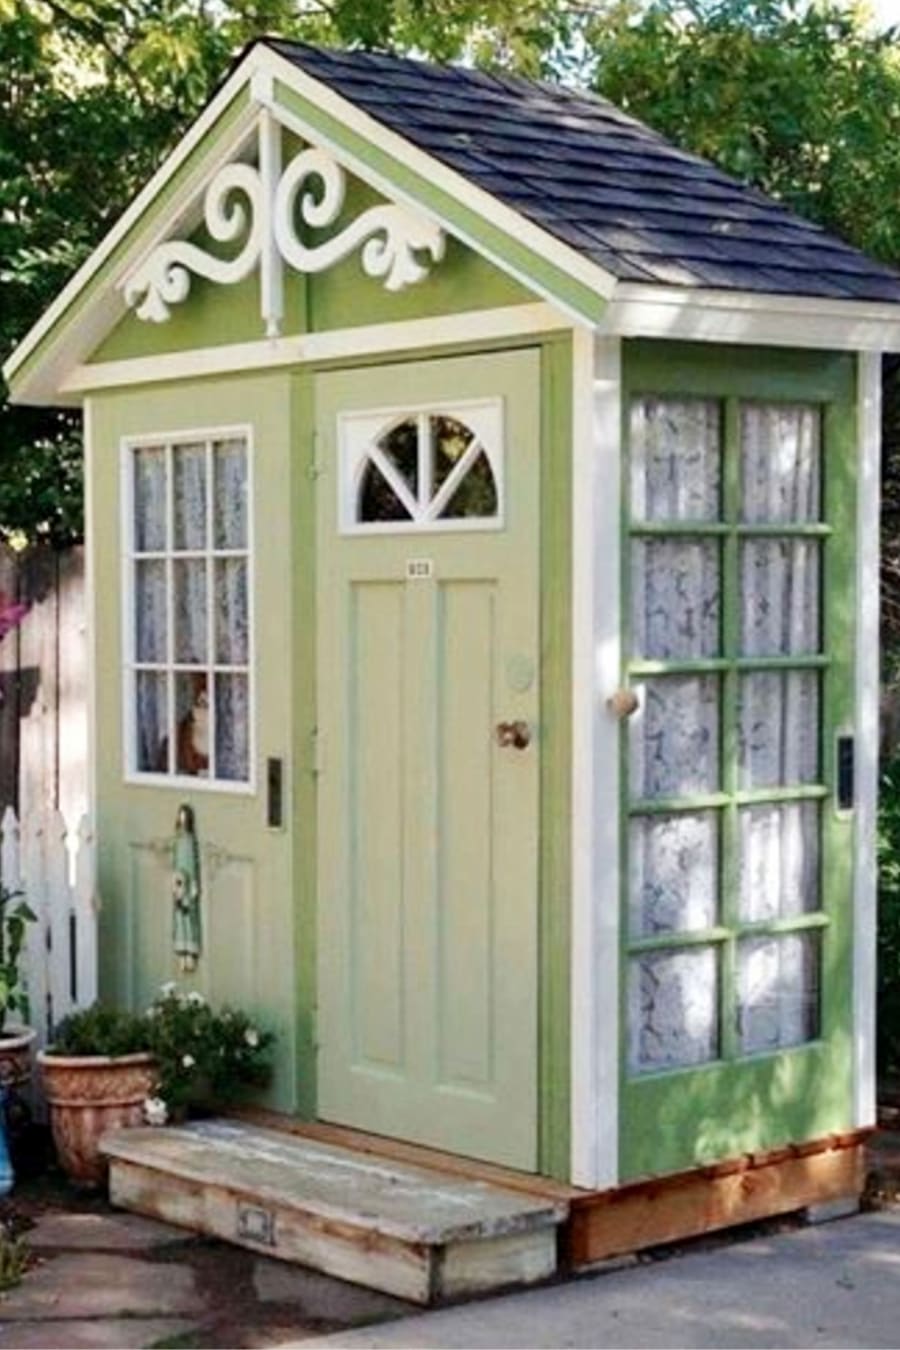 She Shed Ideas We LOVE - This She Shed Garden Shed Is made From Old Doors - What a Clever DIY Repurposed Upclycled Outdoor Building Idea!